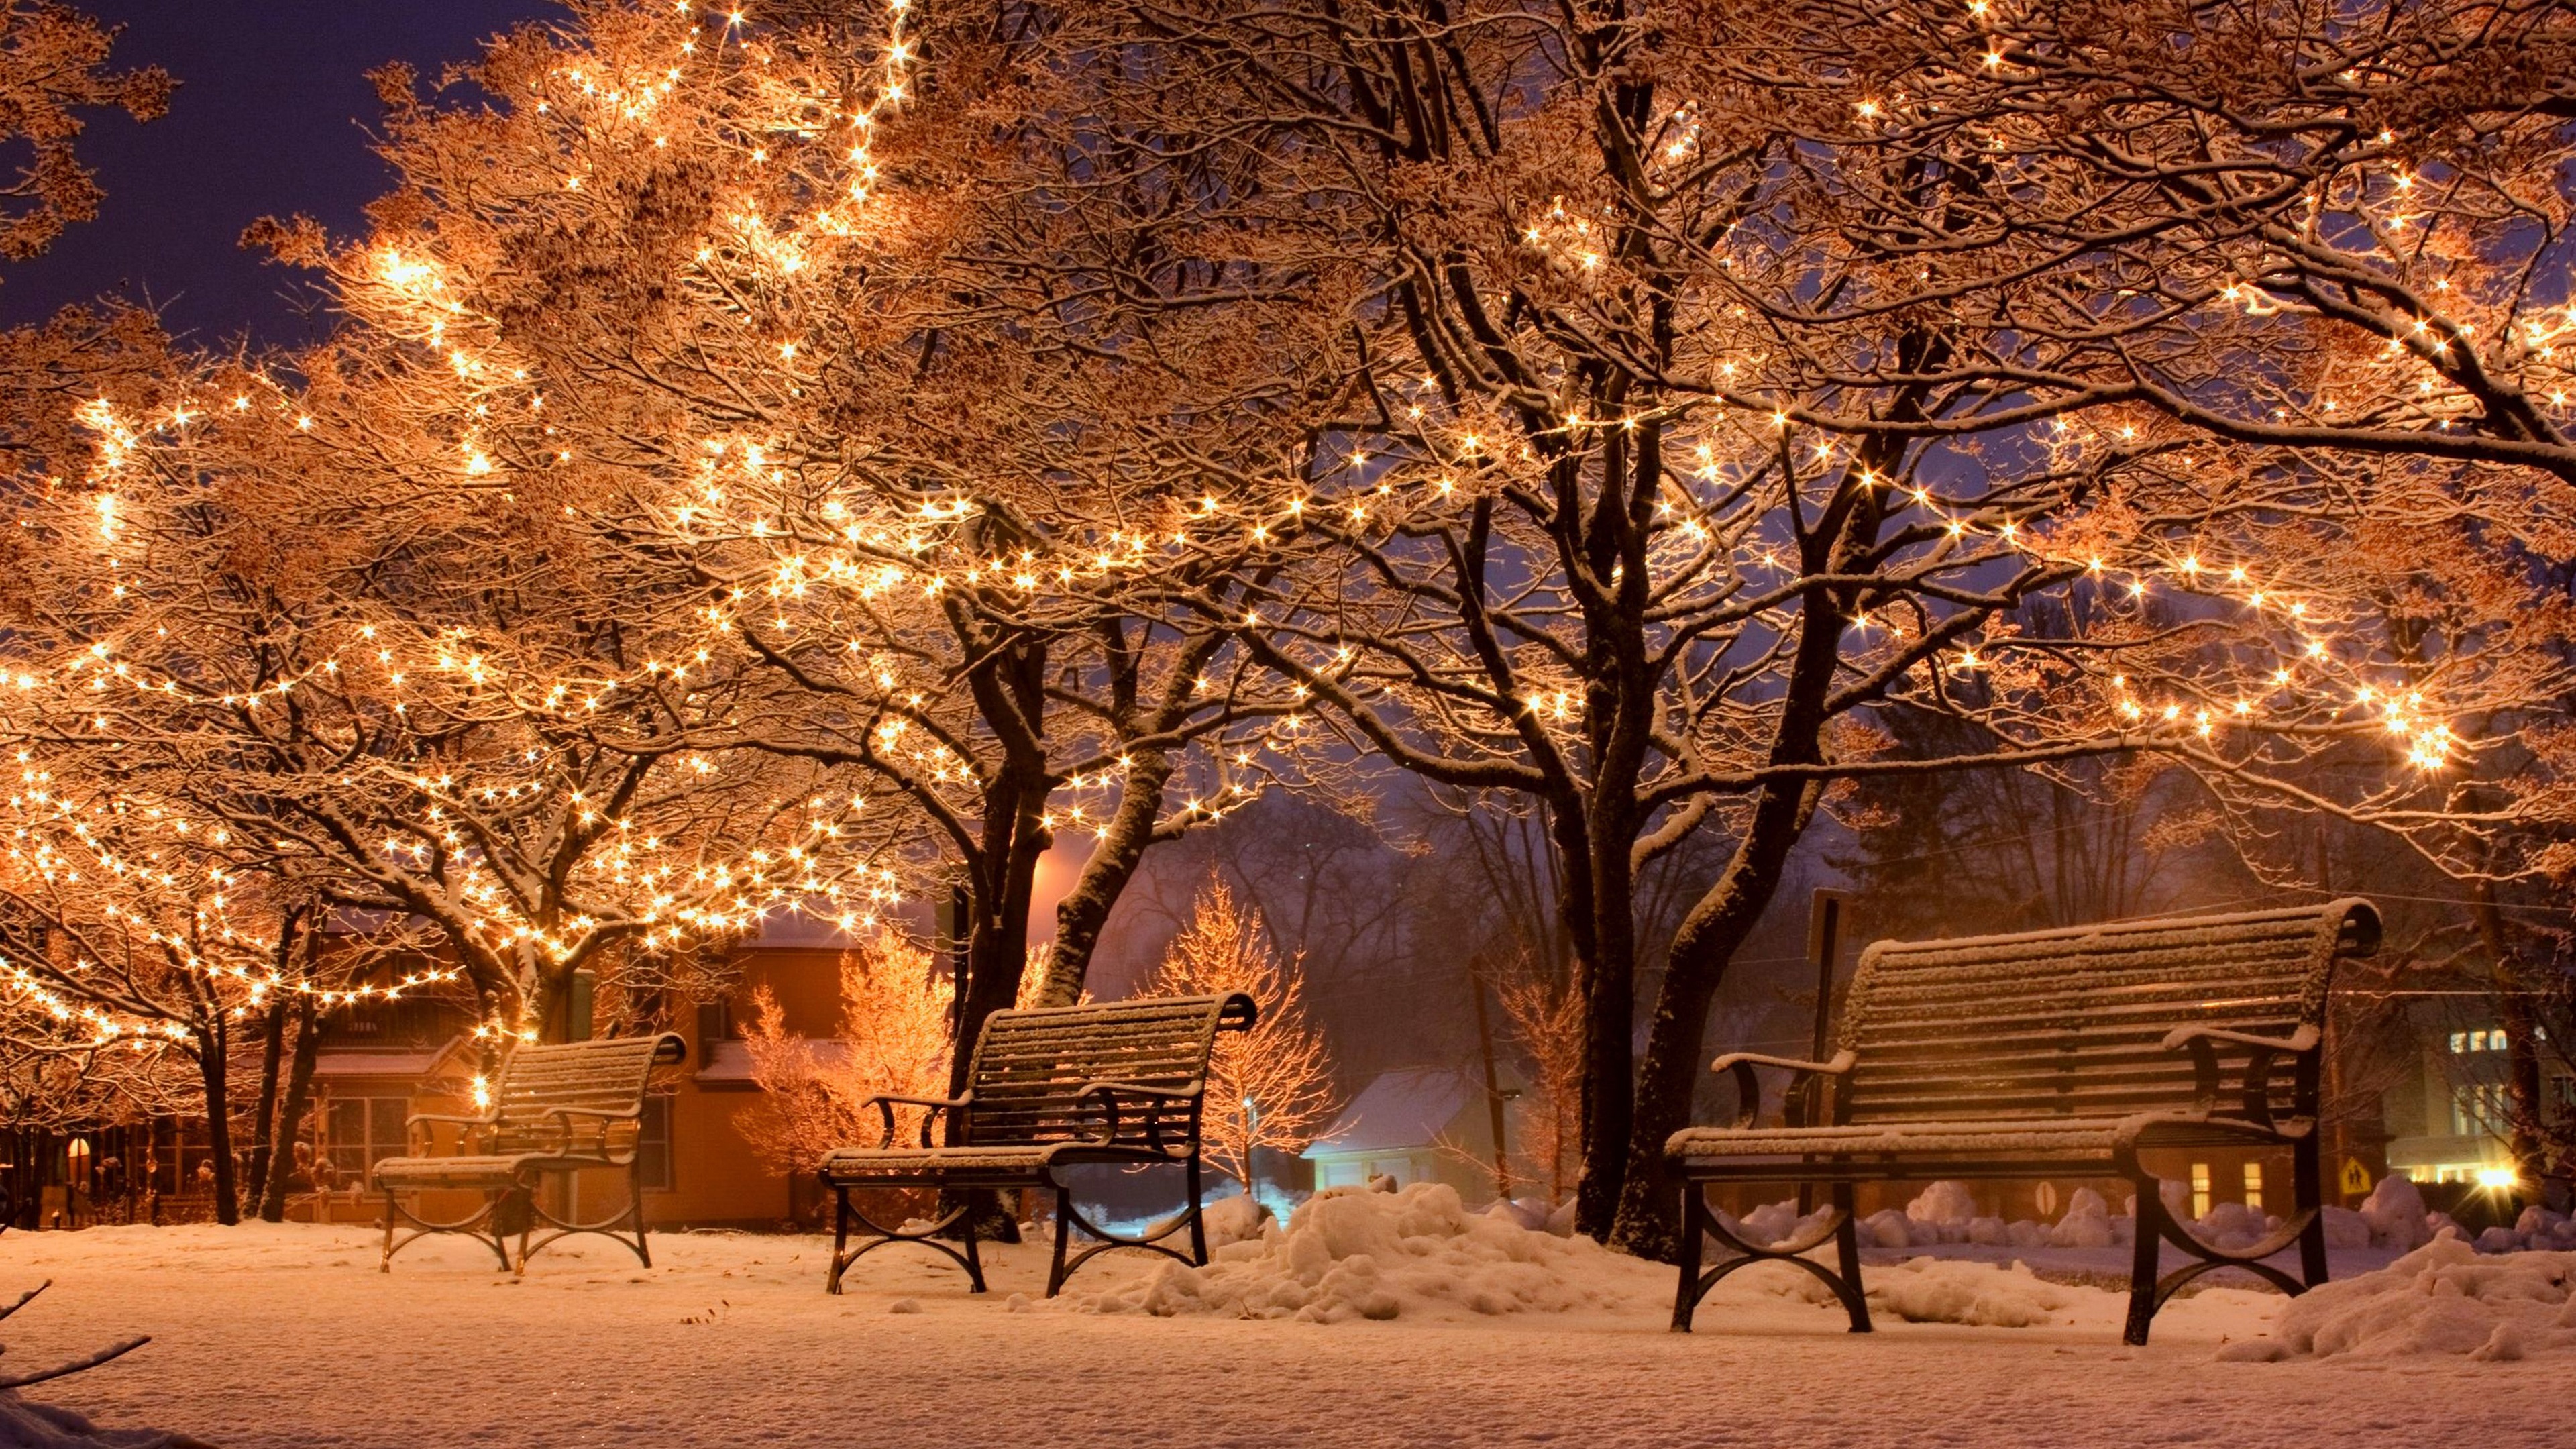 Wallpaper Winter, night, snow, benches, trees, street, holiday lights 3840x2160 UHD 4K Picture, Image